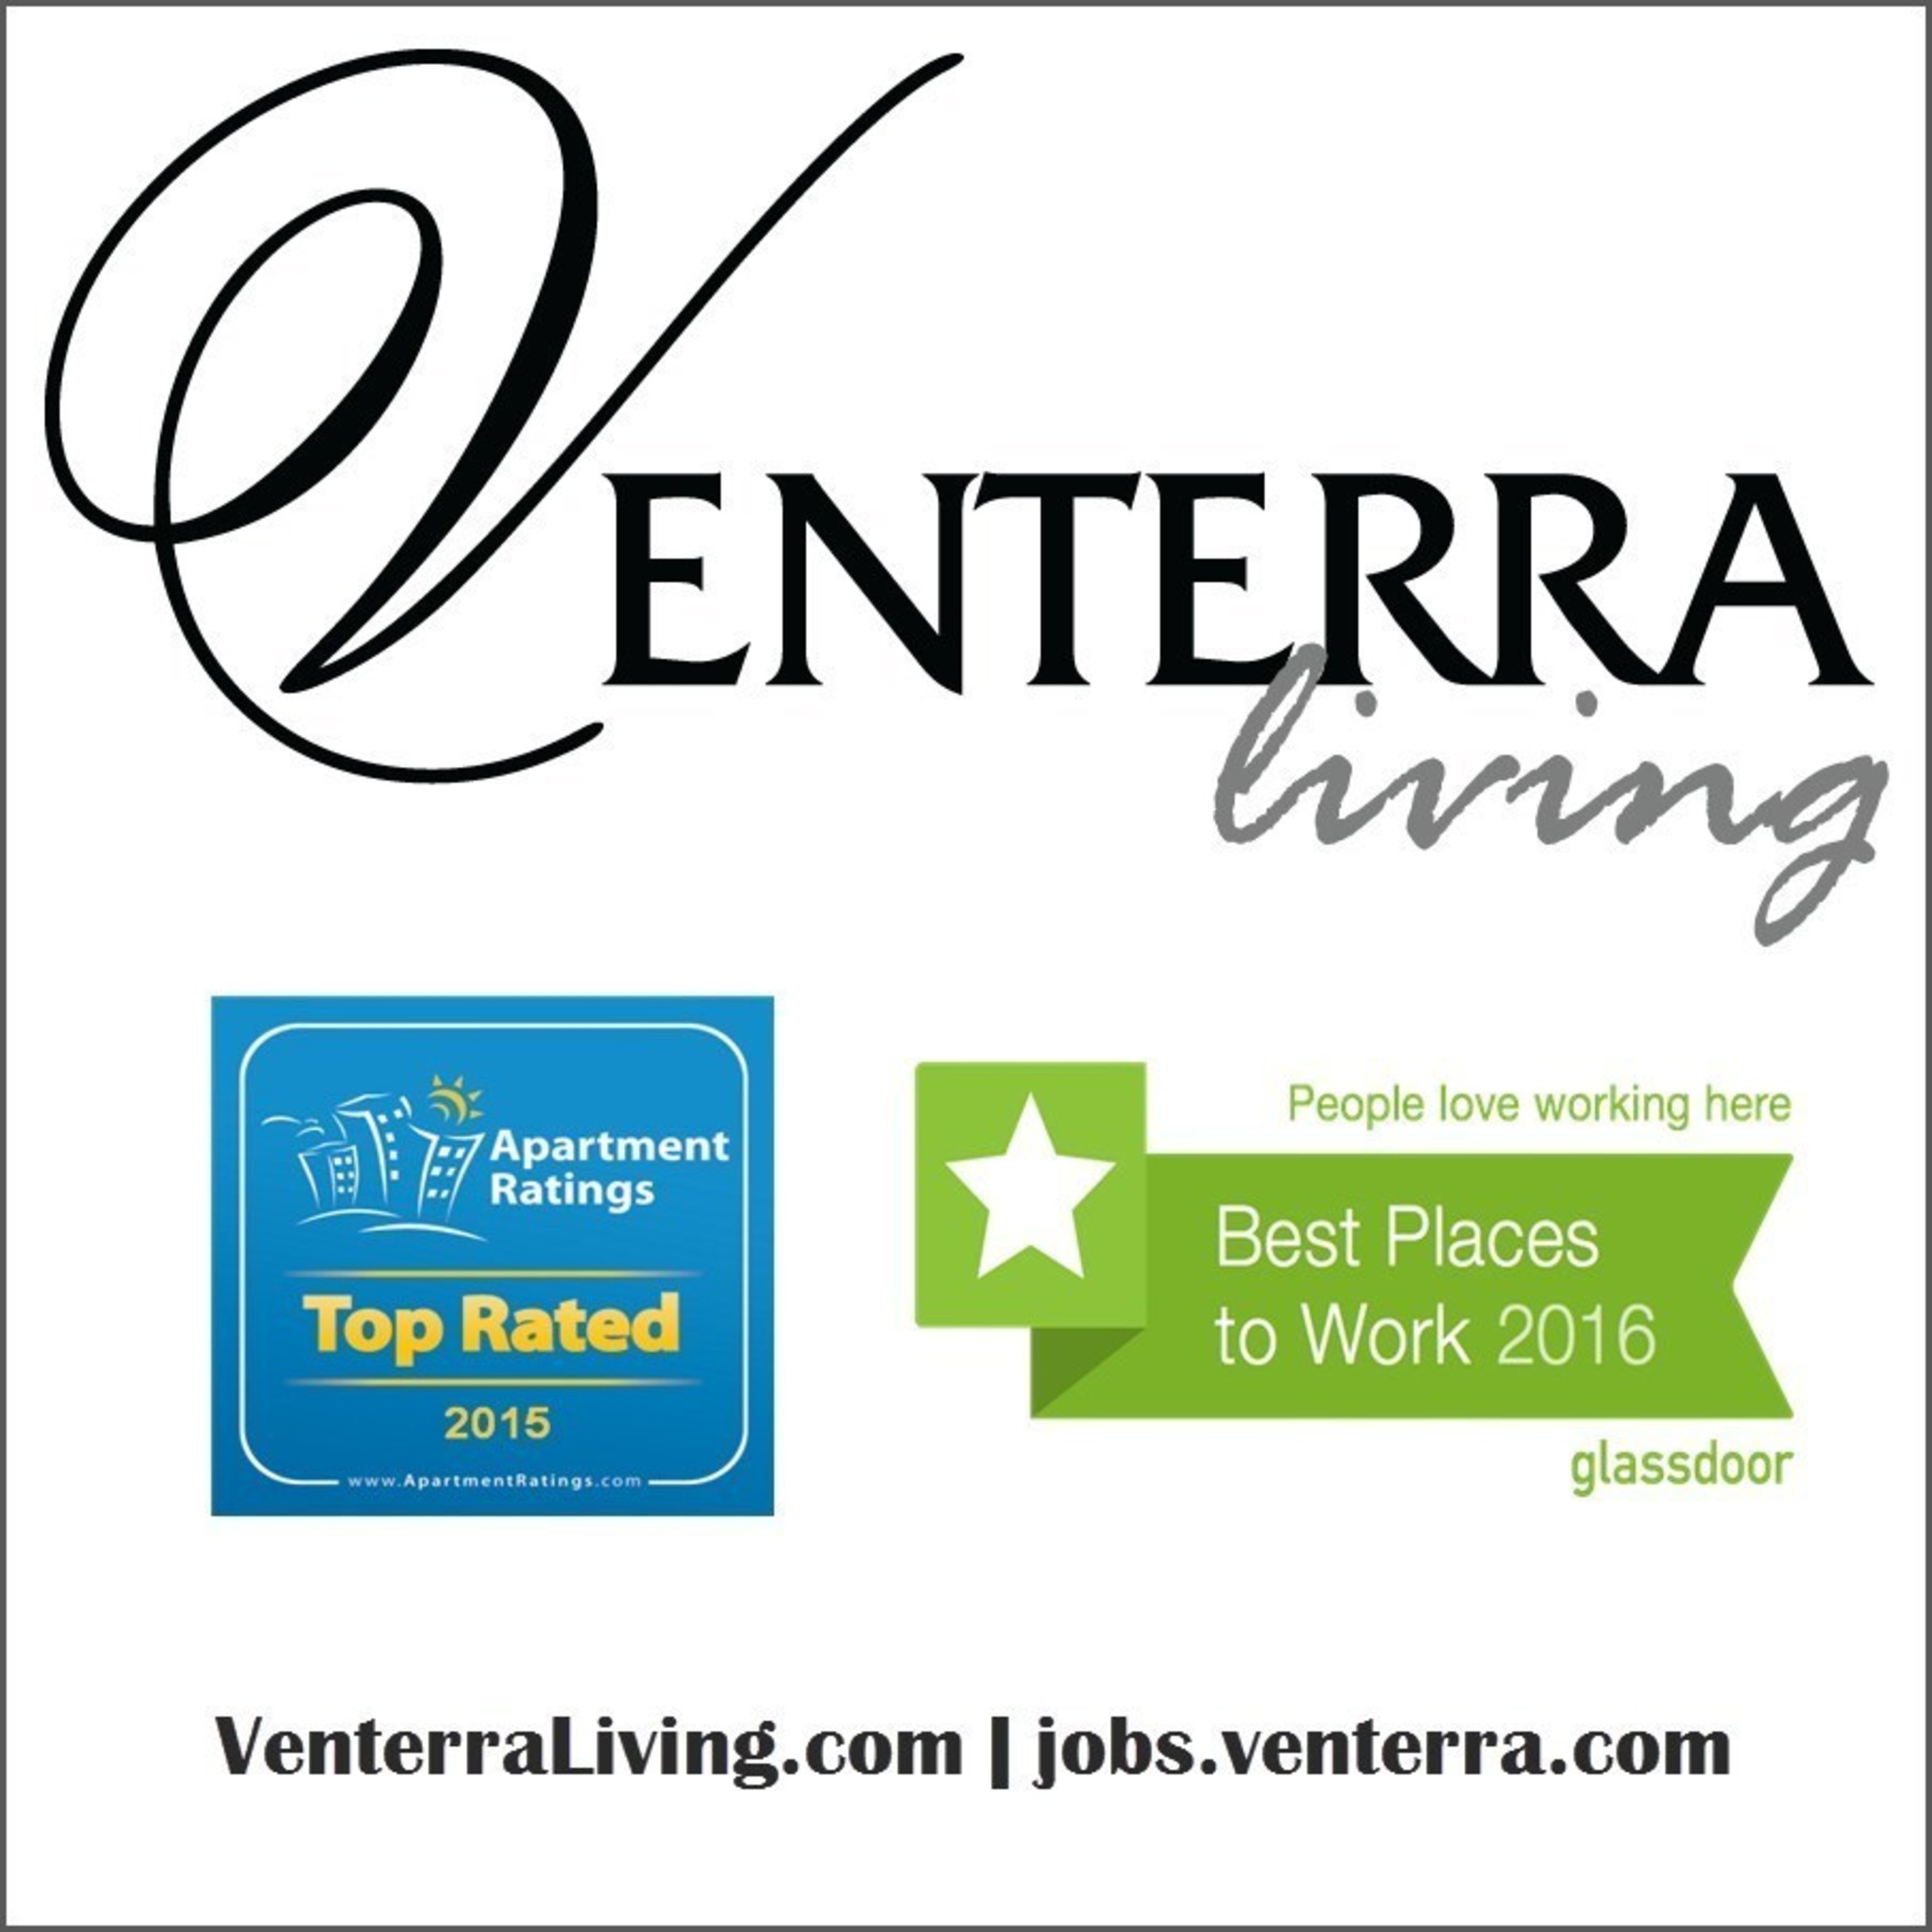 Venterra Realty was awarded Top Rated on ApartmentRatings.com for the 4th year in a row! In 2015, 95% of Venterra Realty's apartment communities were named Top Rated.